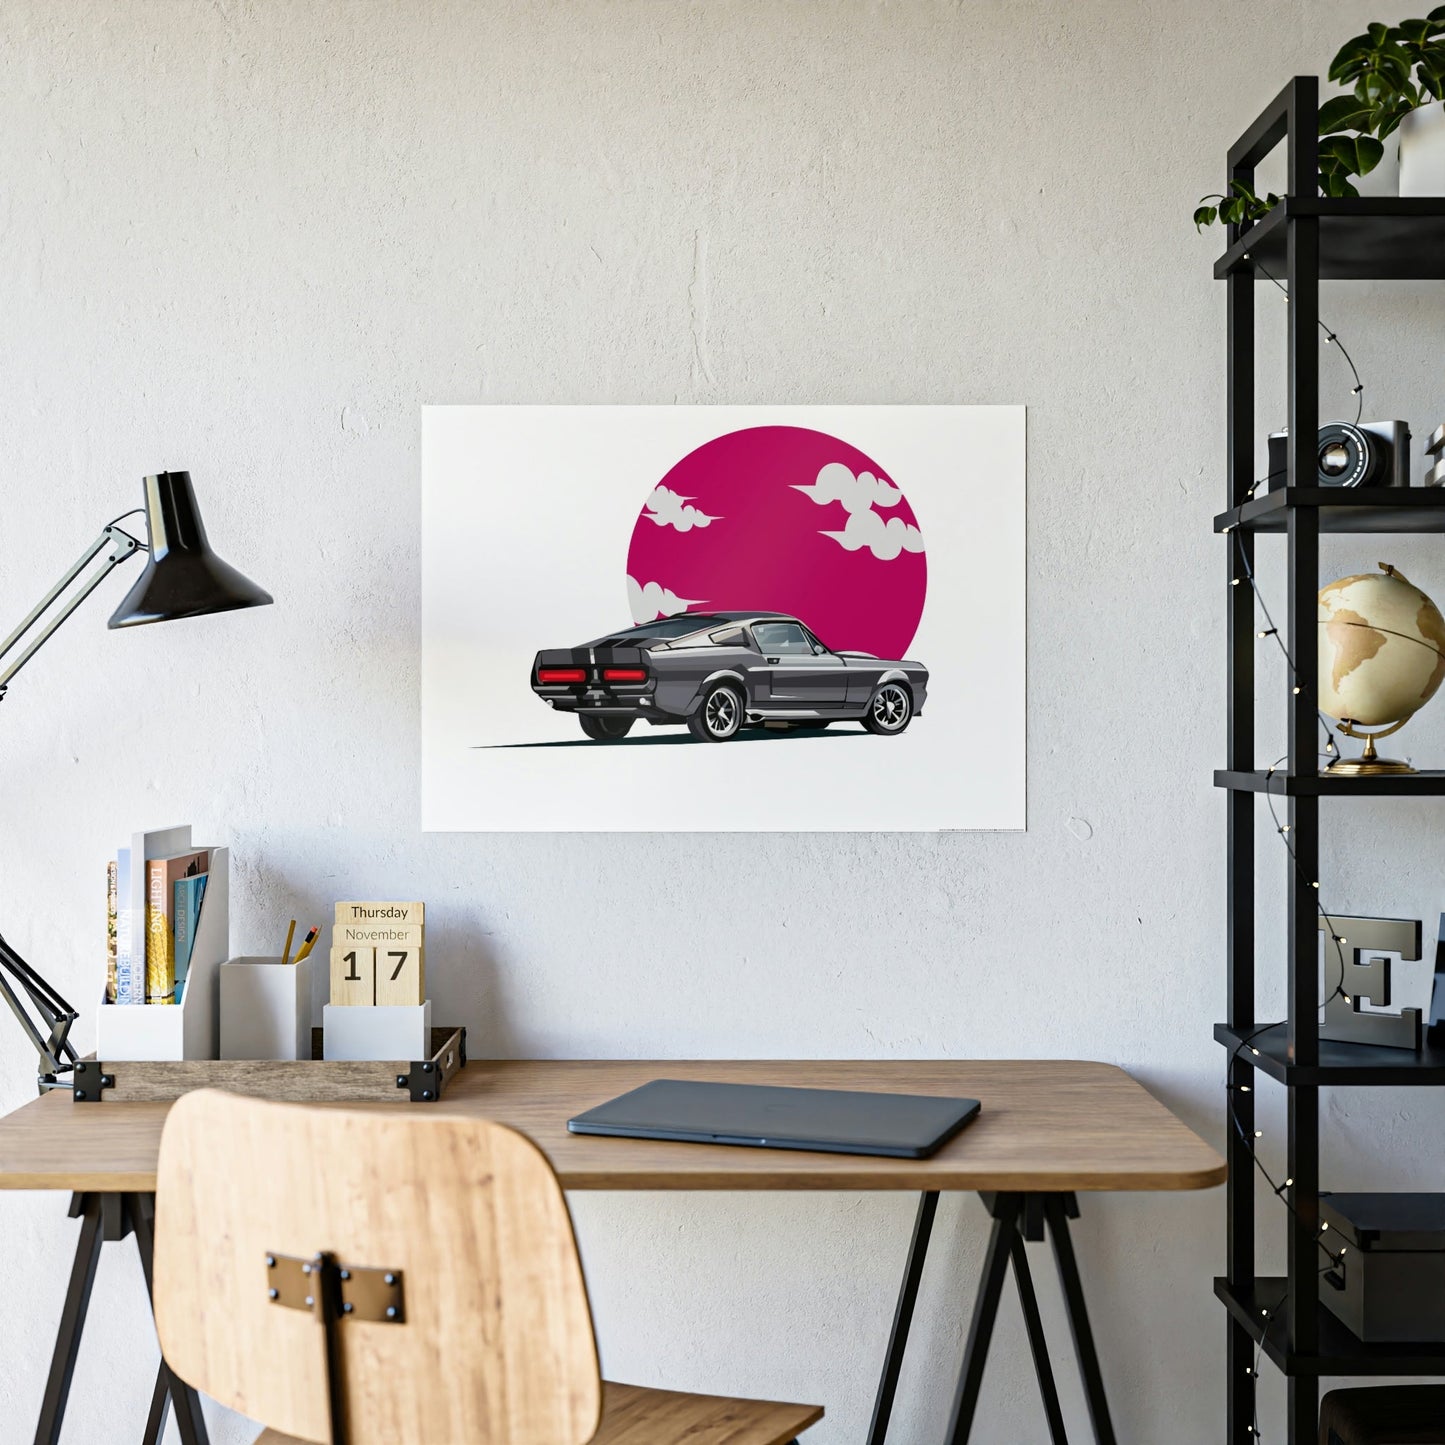 Iconic Mustang: Framed Poster and Art Print on Canvas